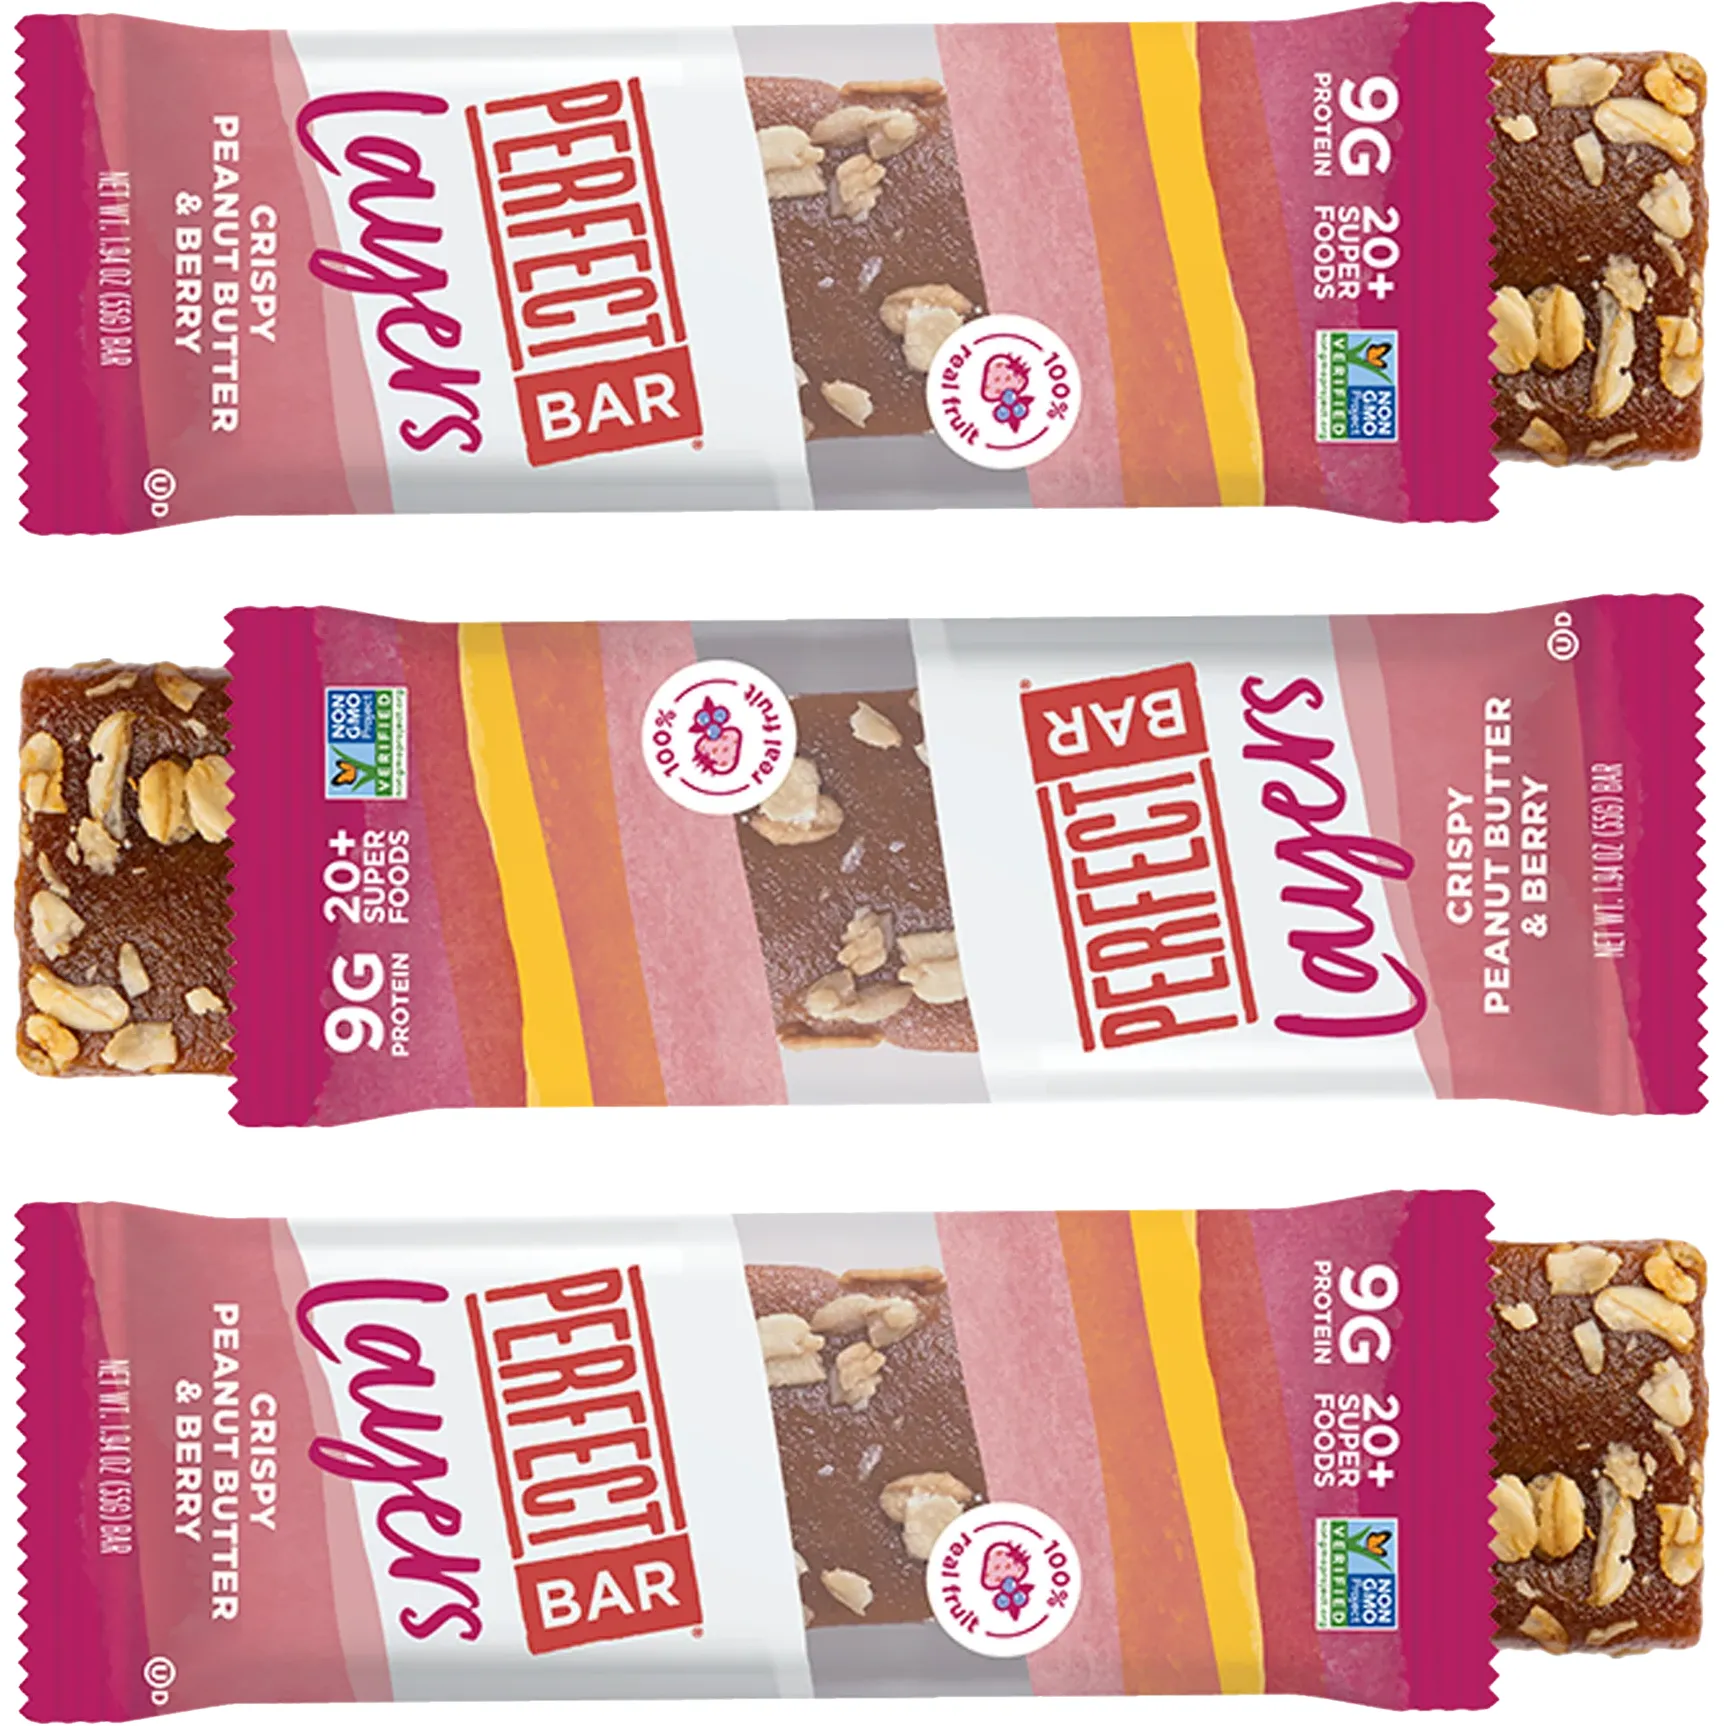 Free Perfect Bar Crispy Peanut Butter & Berry Layers